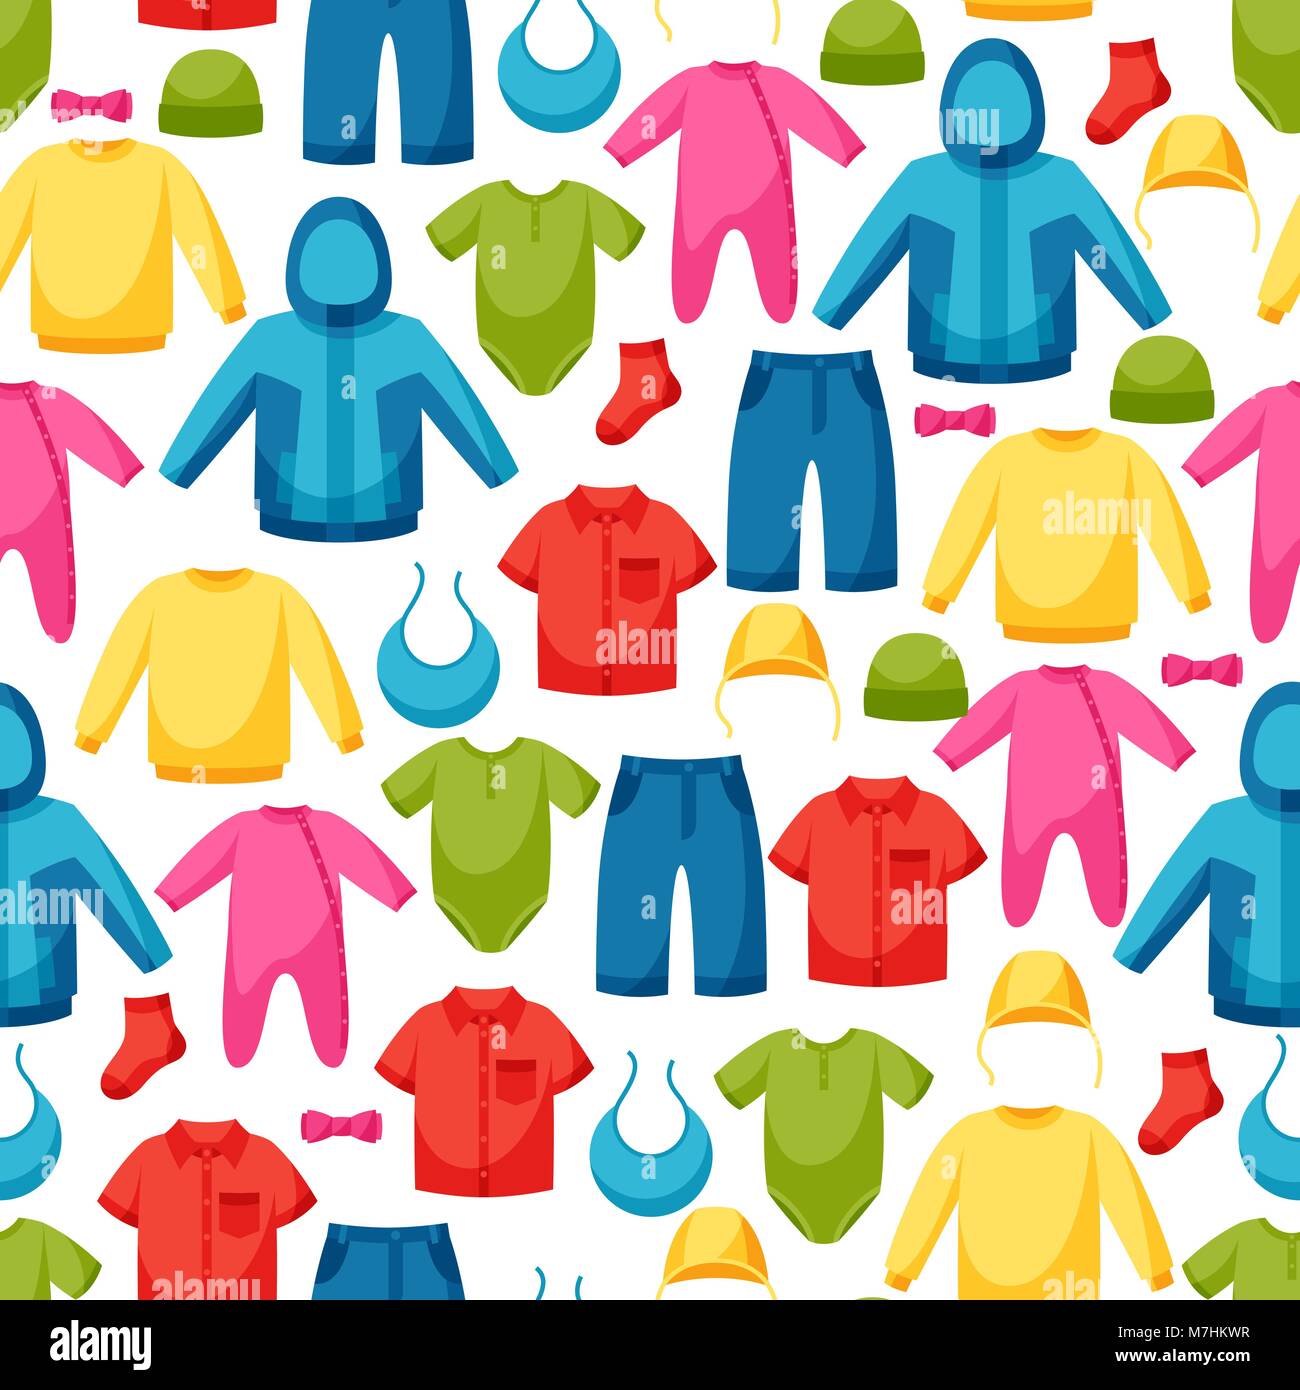 Baby clothes. Seamless pattern with clothing items for newborns and children Stock Vector